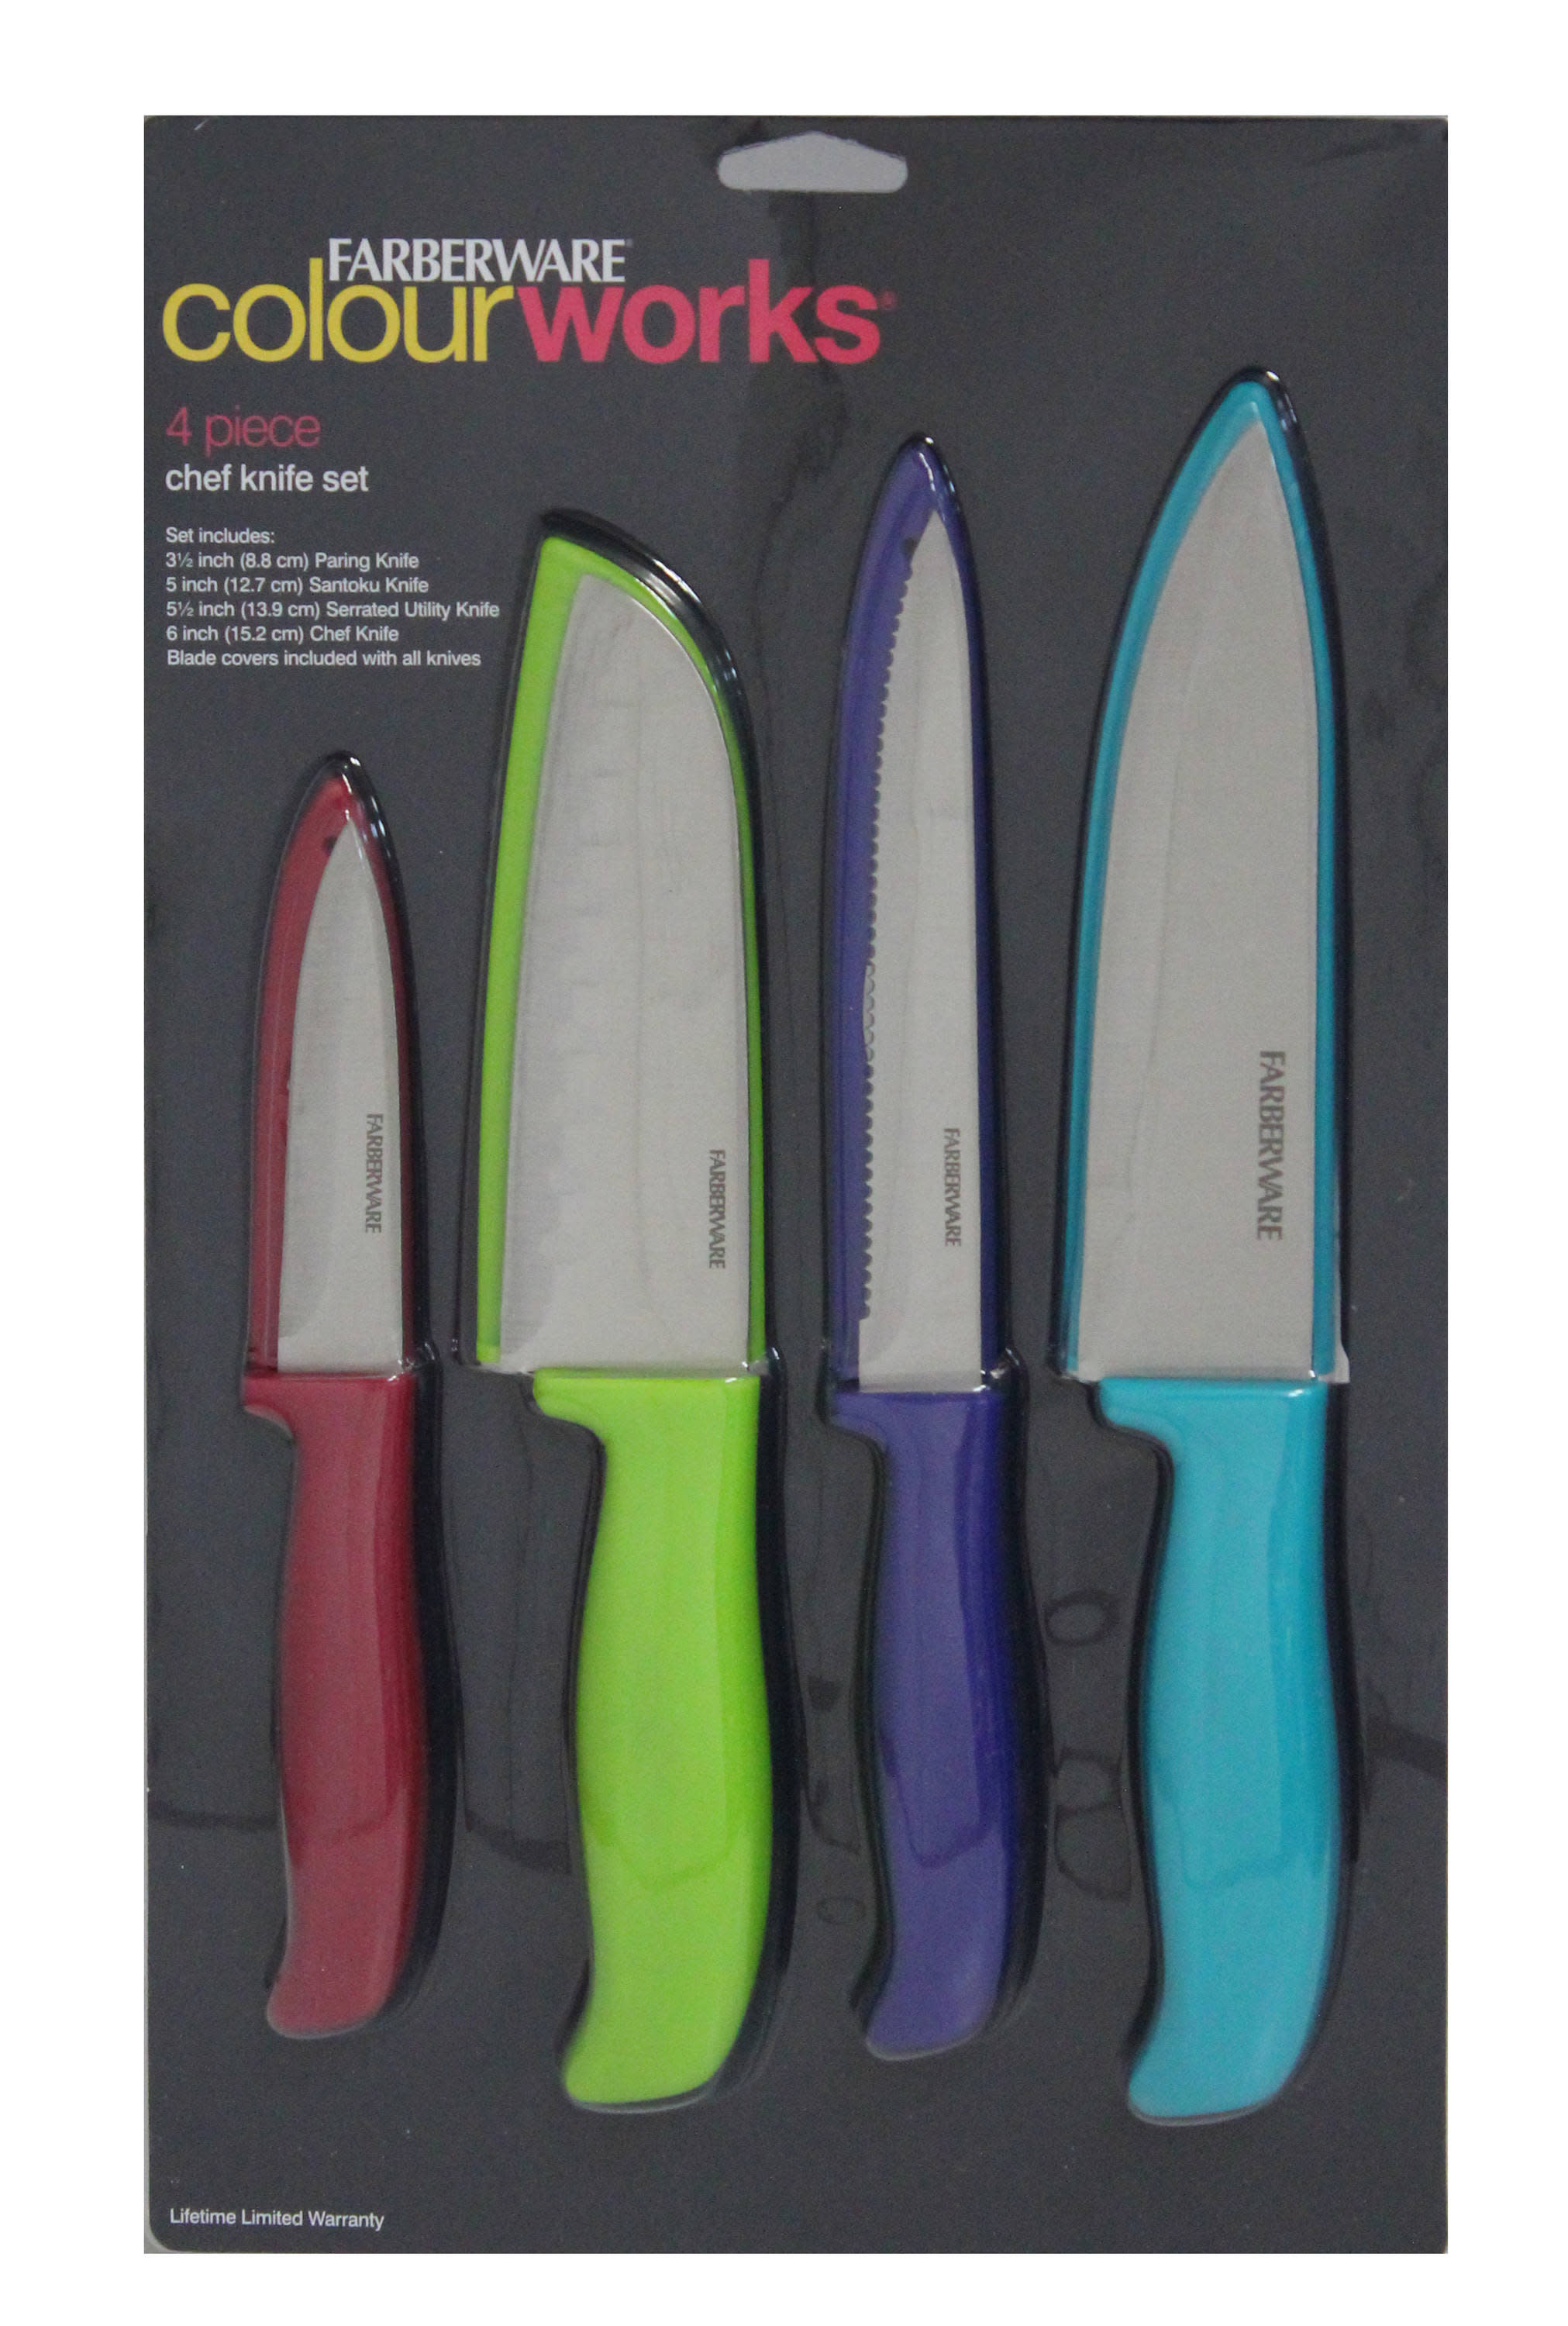 Farberware 4-piece Stamped Prep Knife Set Colored Plastic Handles - image 3 of 8